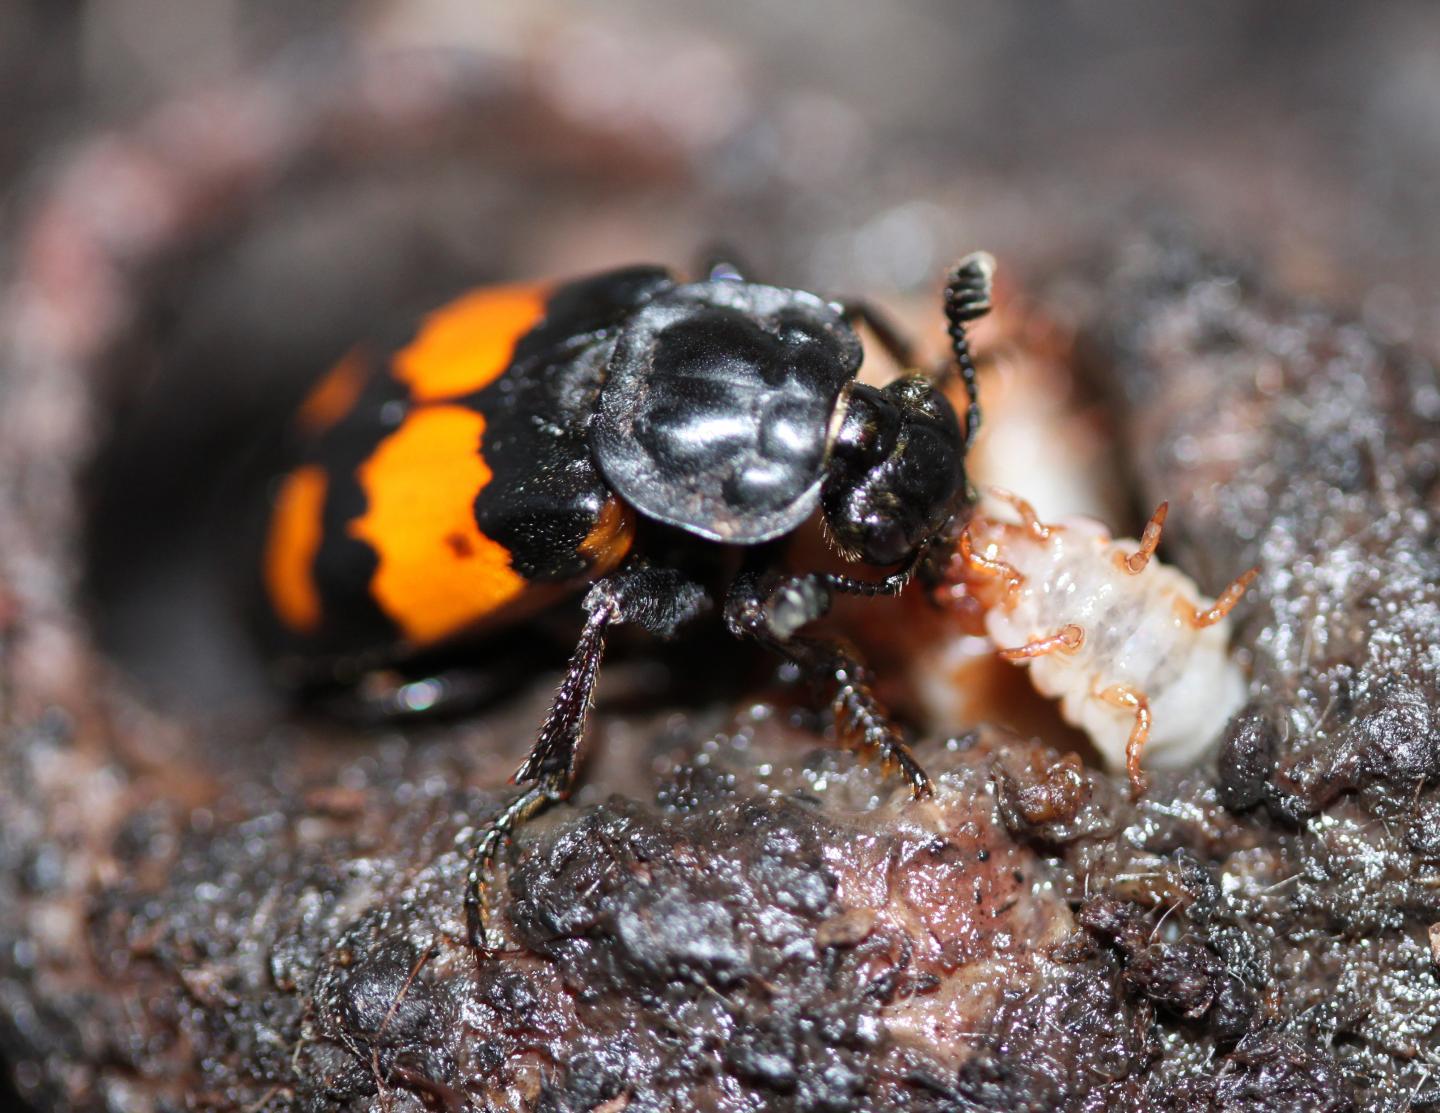 A mother burying beetle feeds her young.